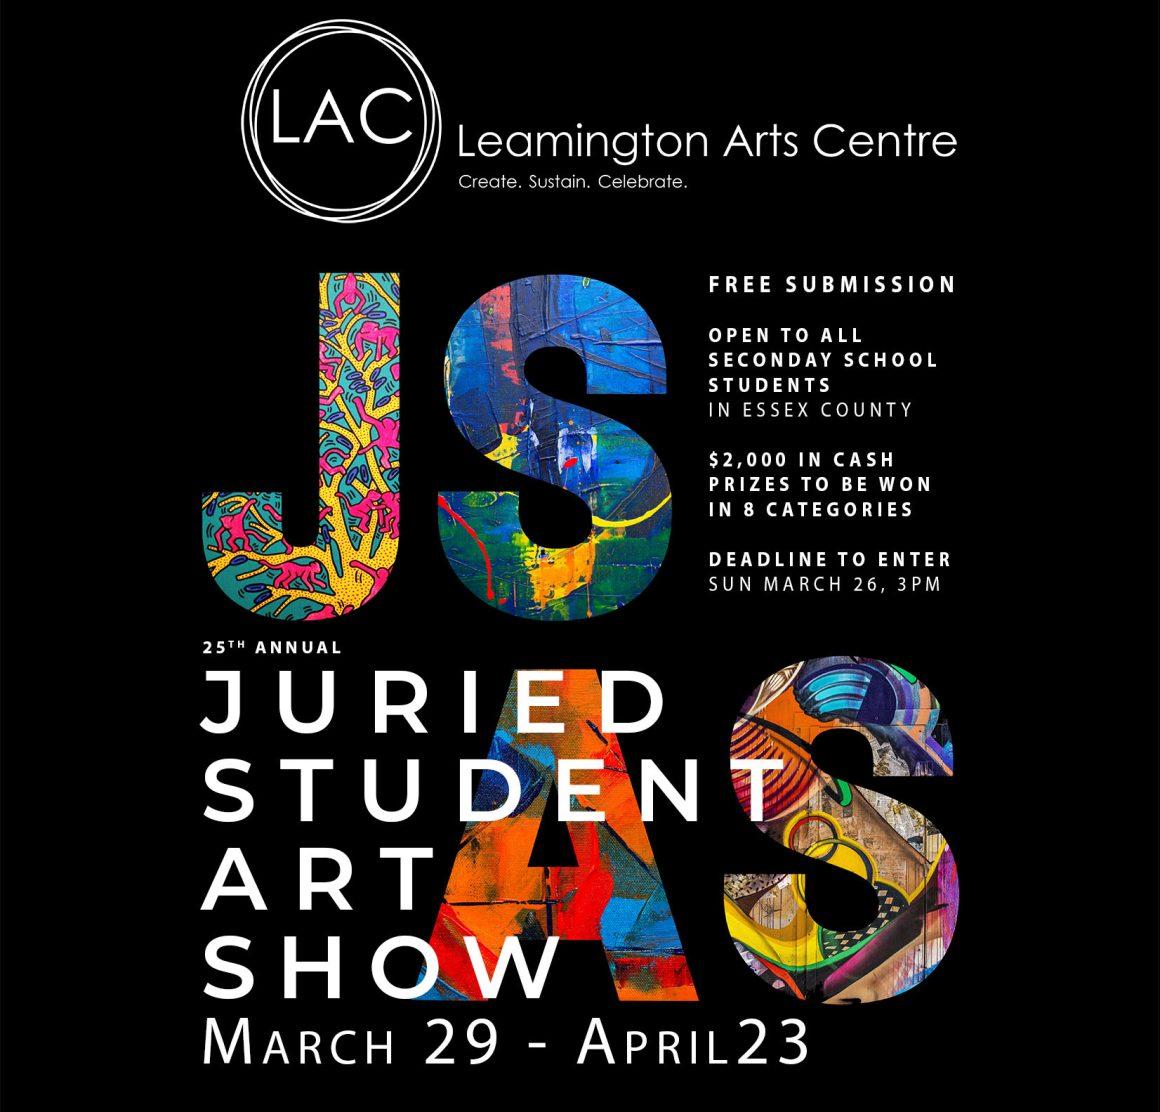 JURIED STUDENT ART SHOW: call for submissions